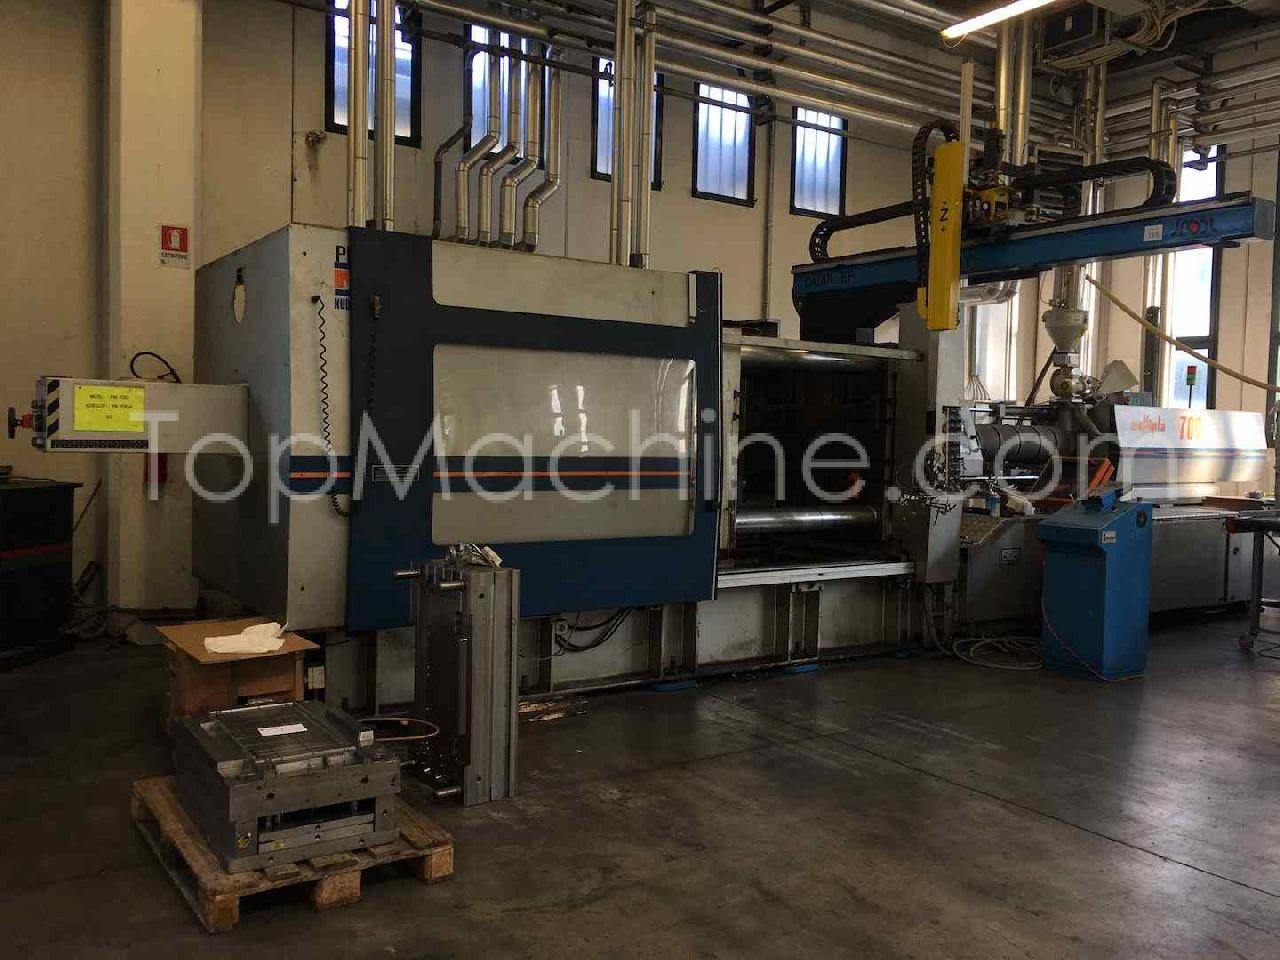 Used NPM - NEW PLASTIC METAL multipla 700 Injection Moulding Clamping force up to 1000 T